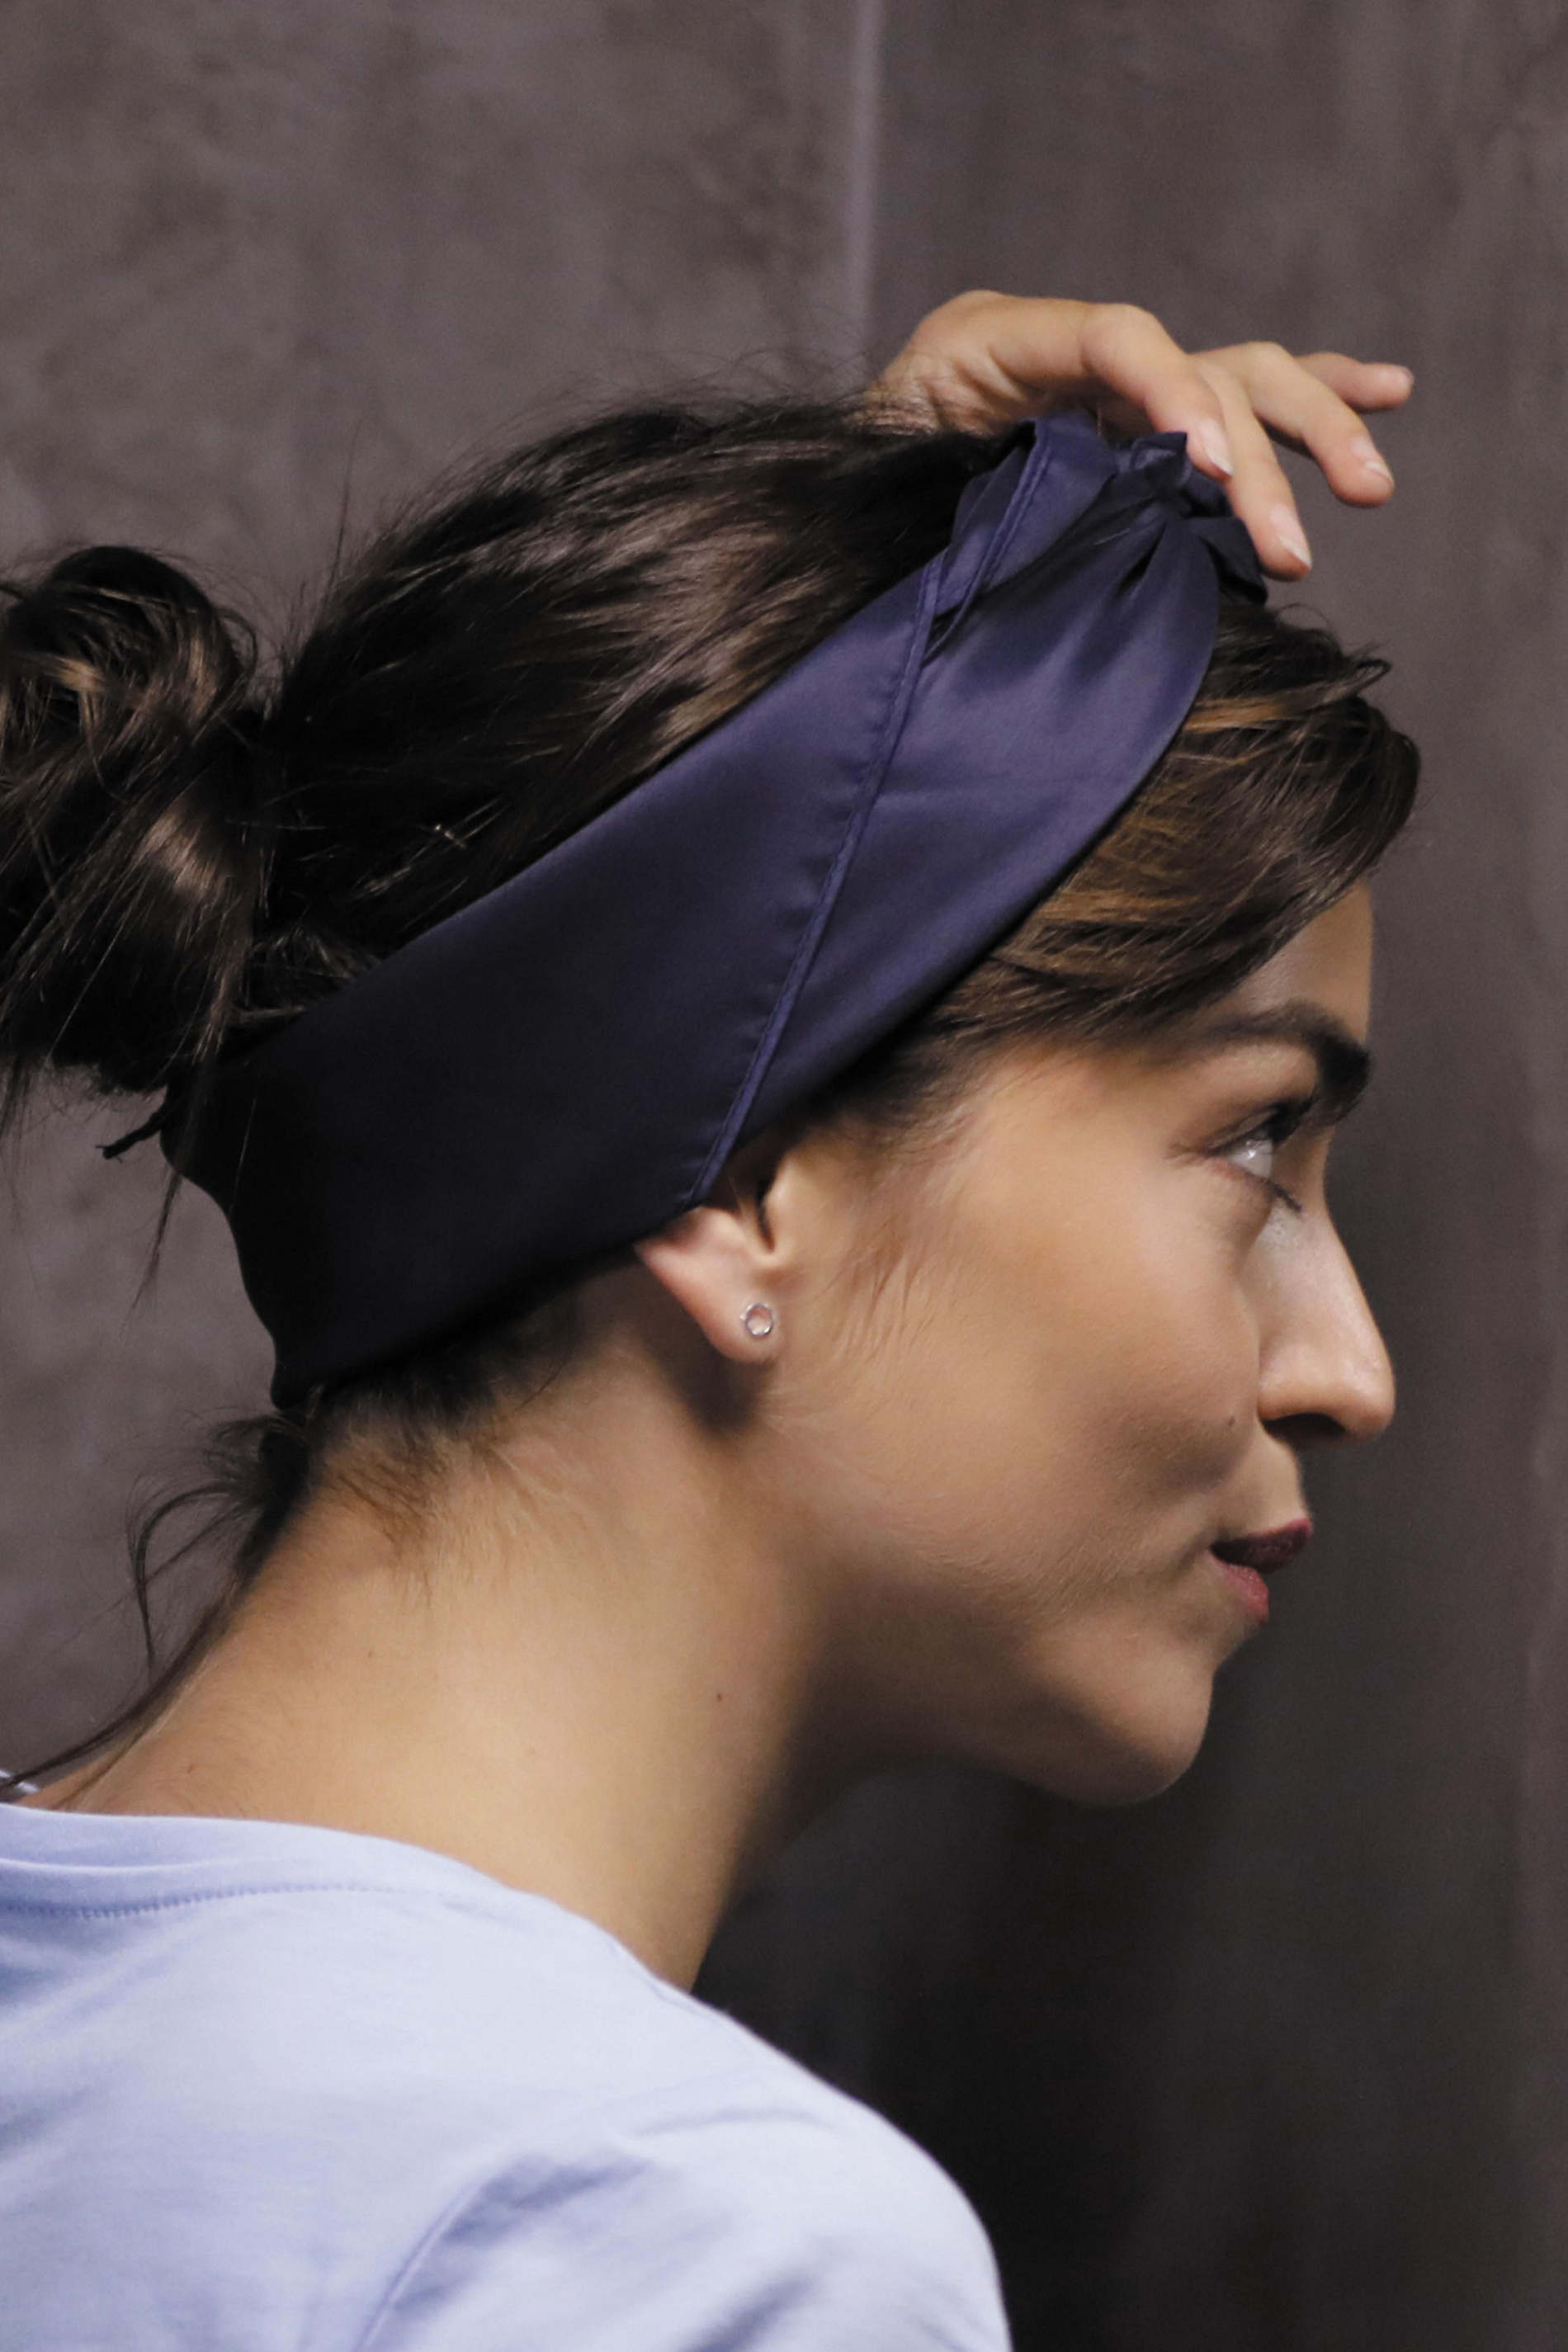 FOULARD<br/><p>A timeless accessory of women’s wardrobe, the satin headscarf is a must-have that can be worn around the neck, as a belt or tied up in your hair.</p> NEOBLU TARA